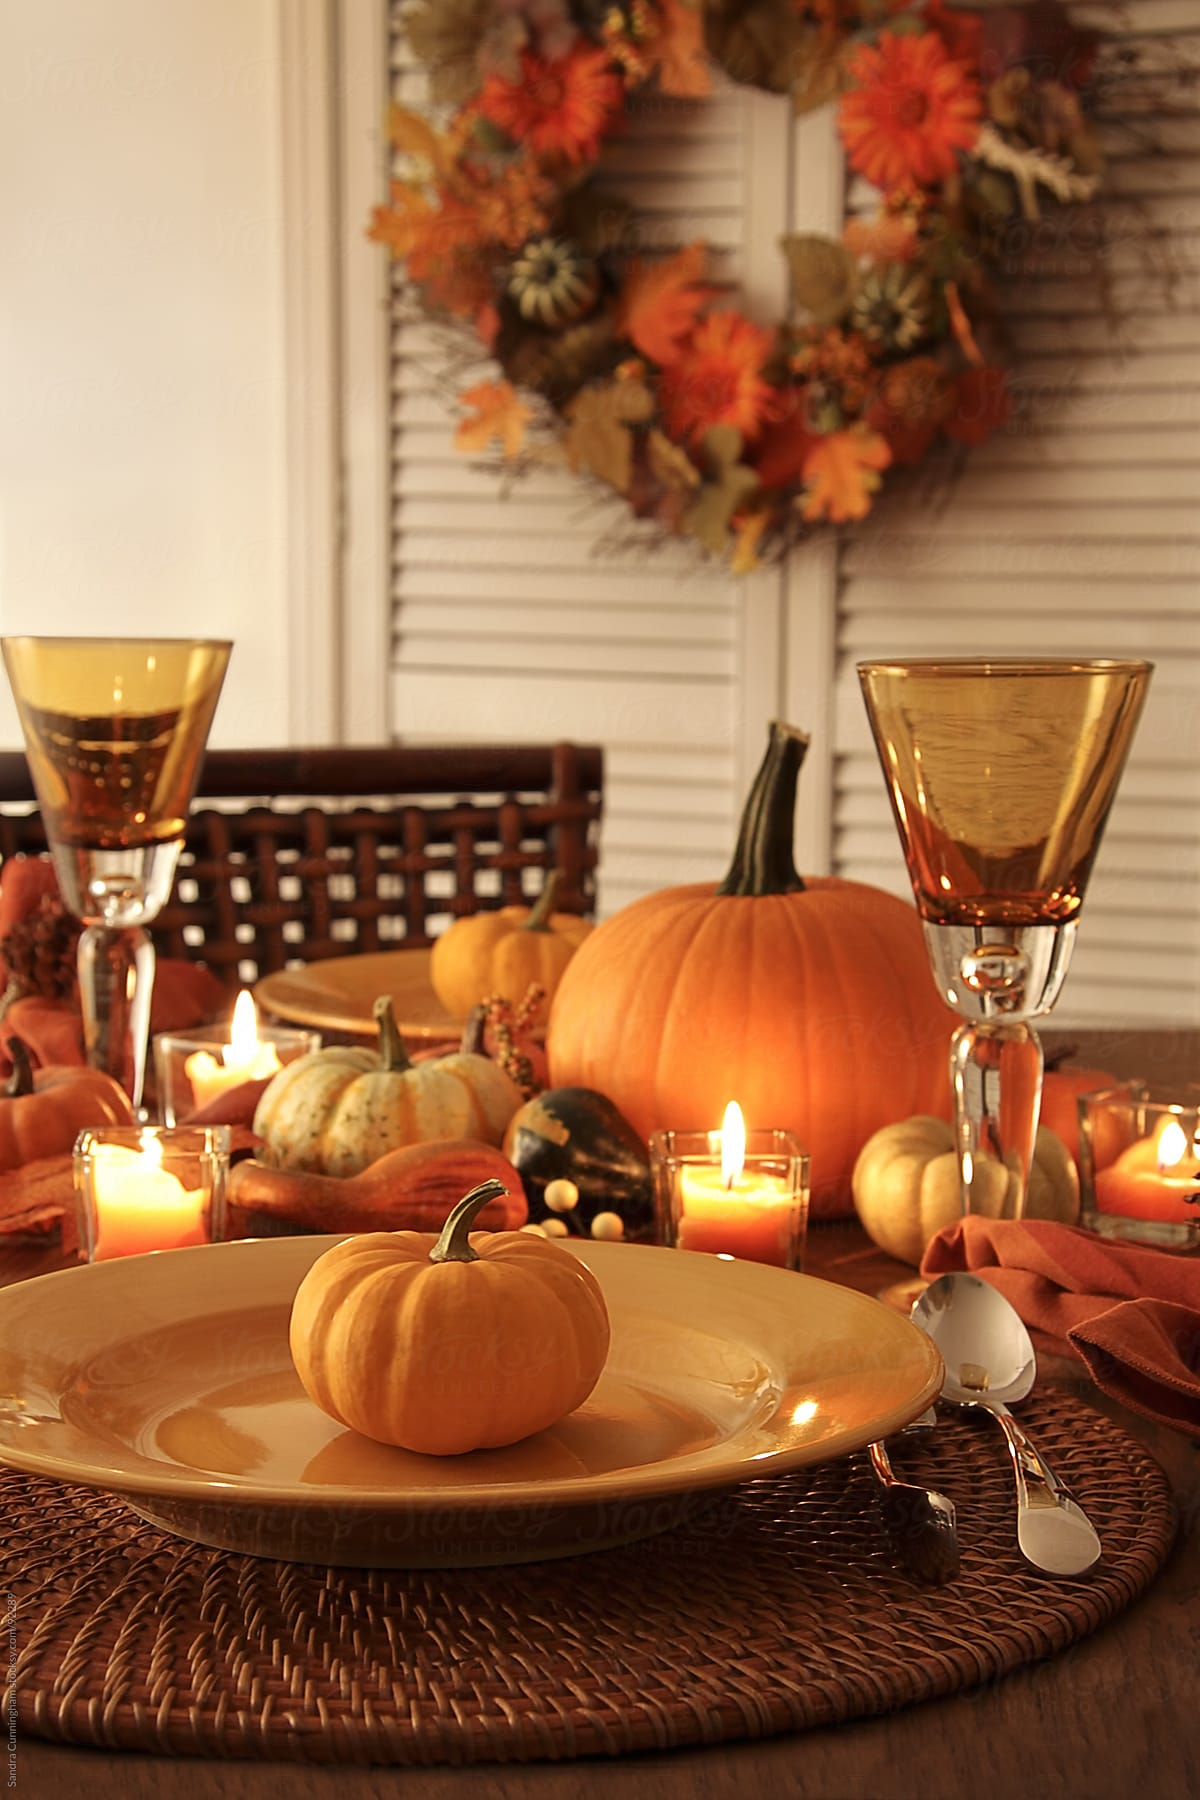 Festive autumn place settings for Thanksgiving